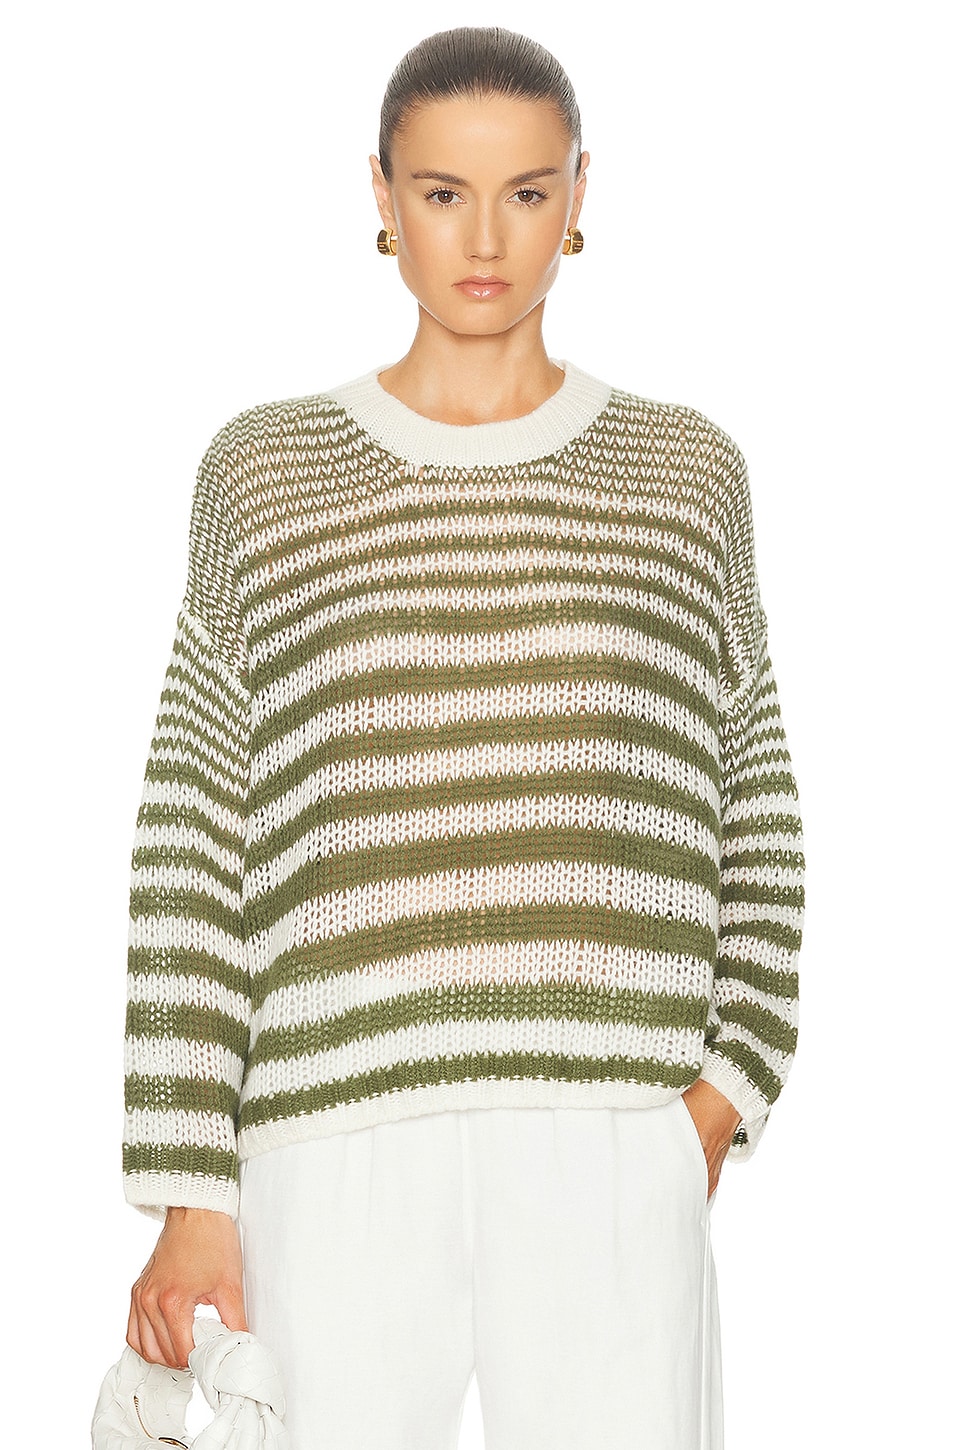 Image 1 of SABLYN Sheyla Slouchy Open Crewneck Striped Pullover Sweater in Olive Multi